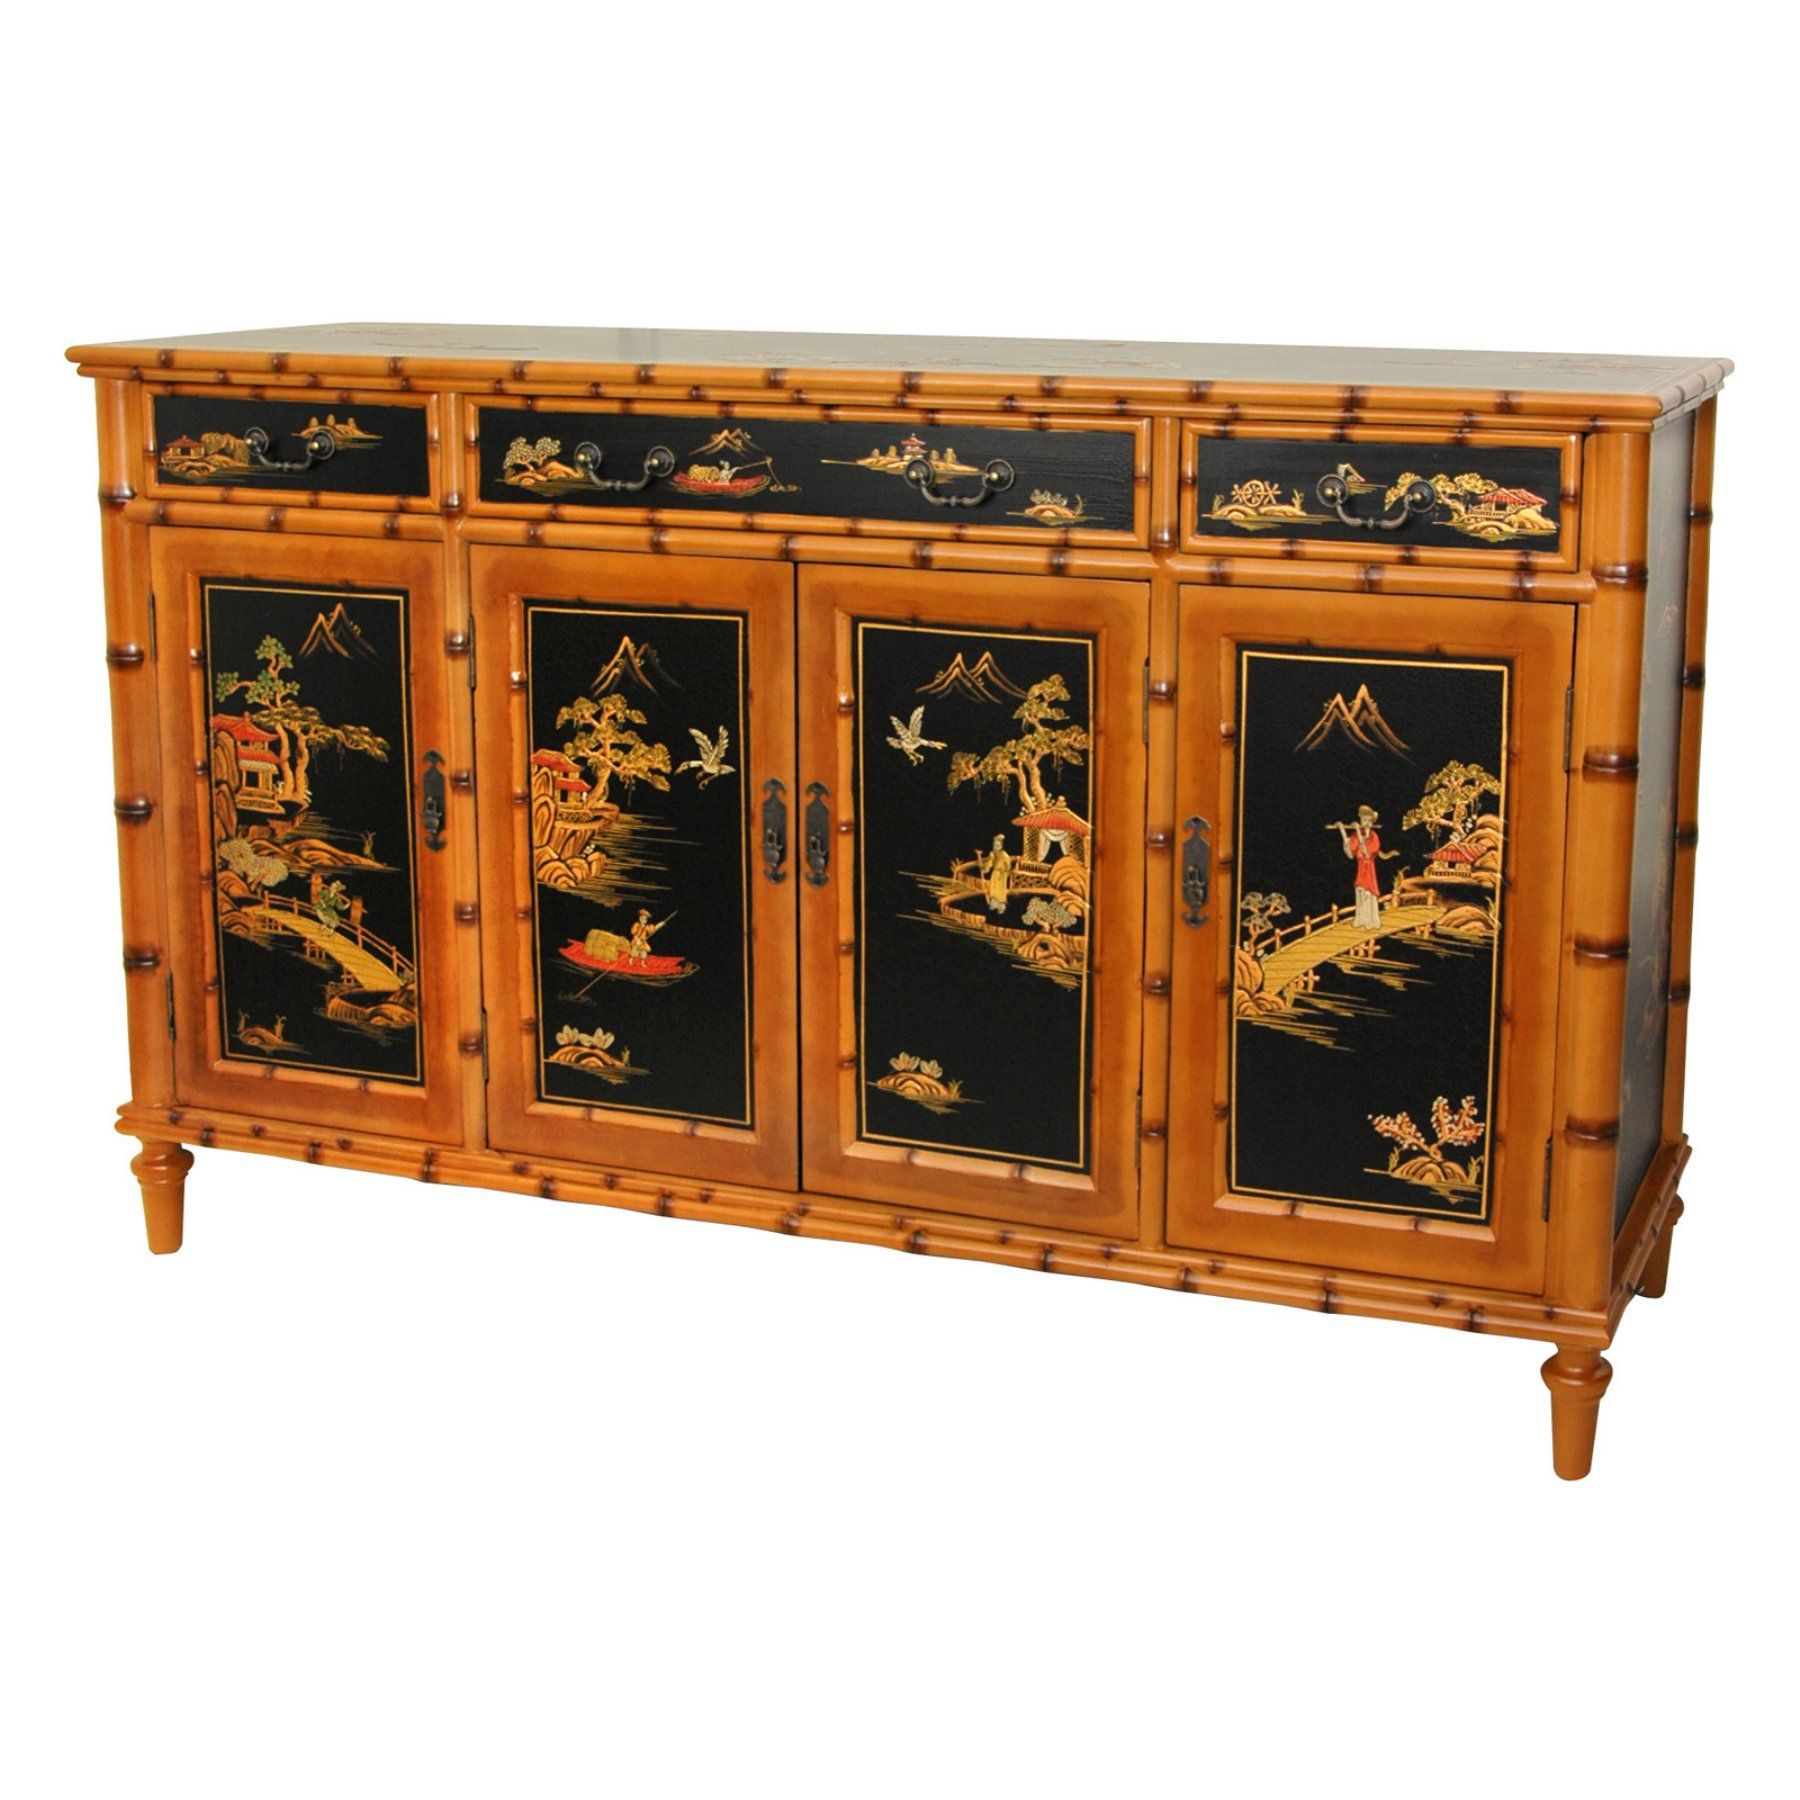 Oriental Furniture Ching Console Table | Products In 2019 Throughout Newest Mcdonnell Sideboards (View 15 of 20)